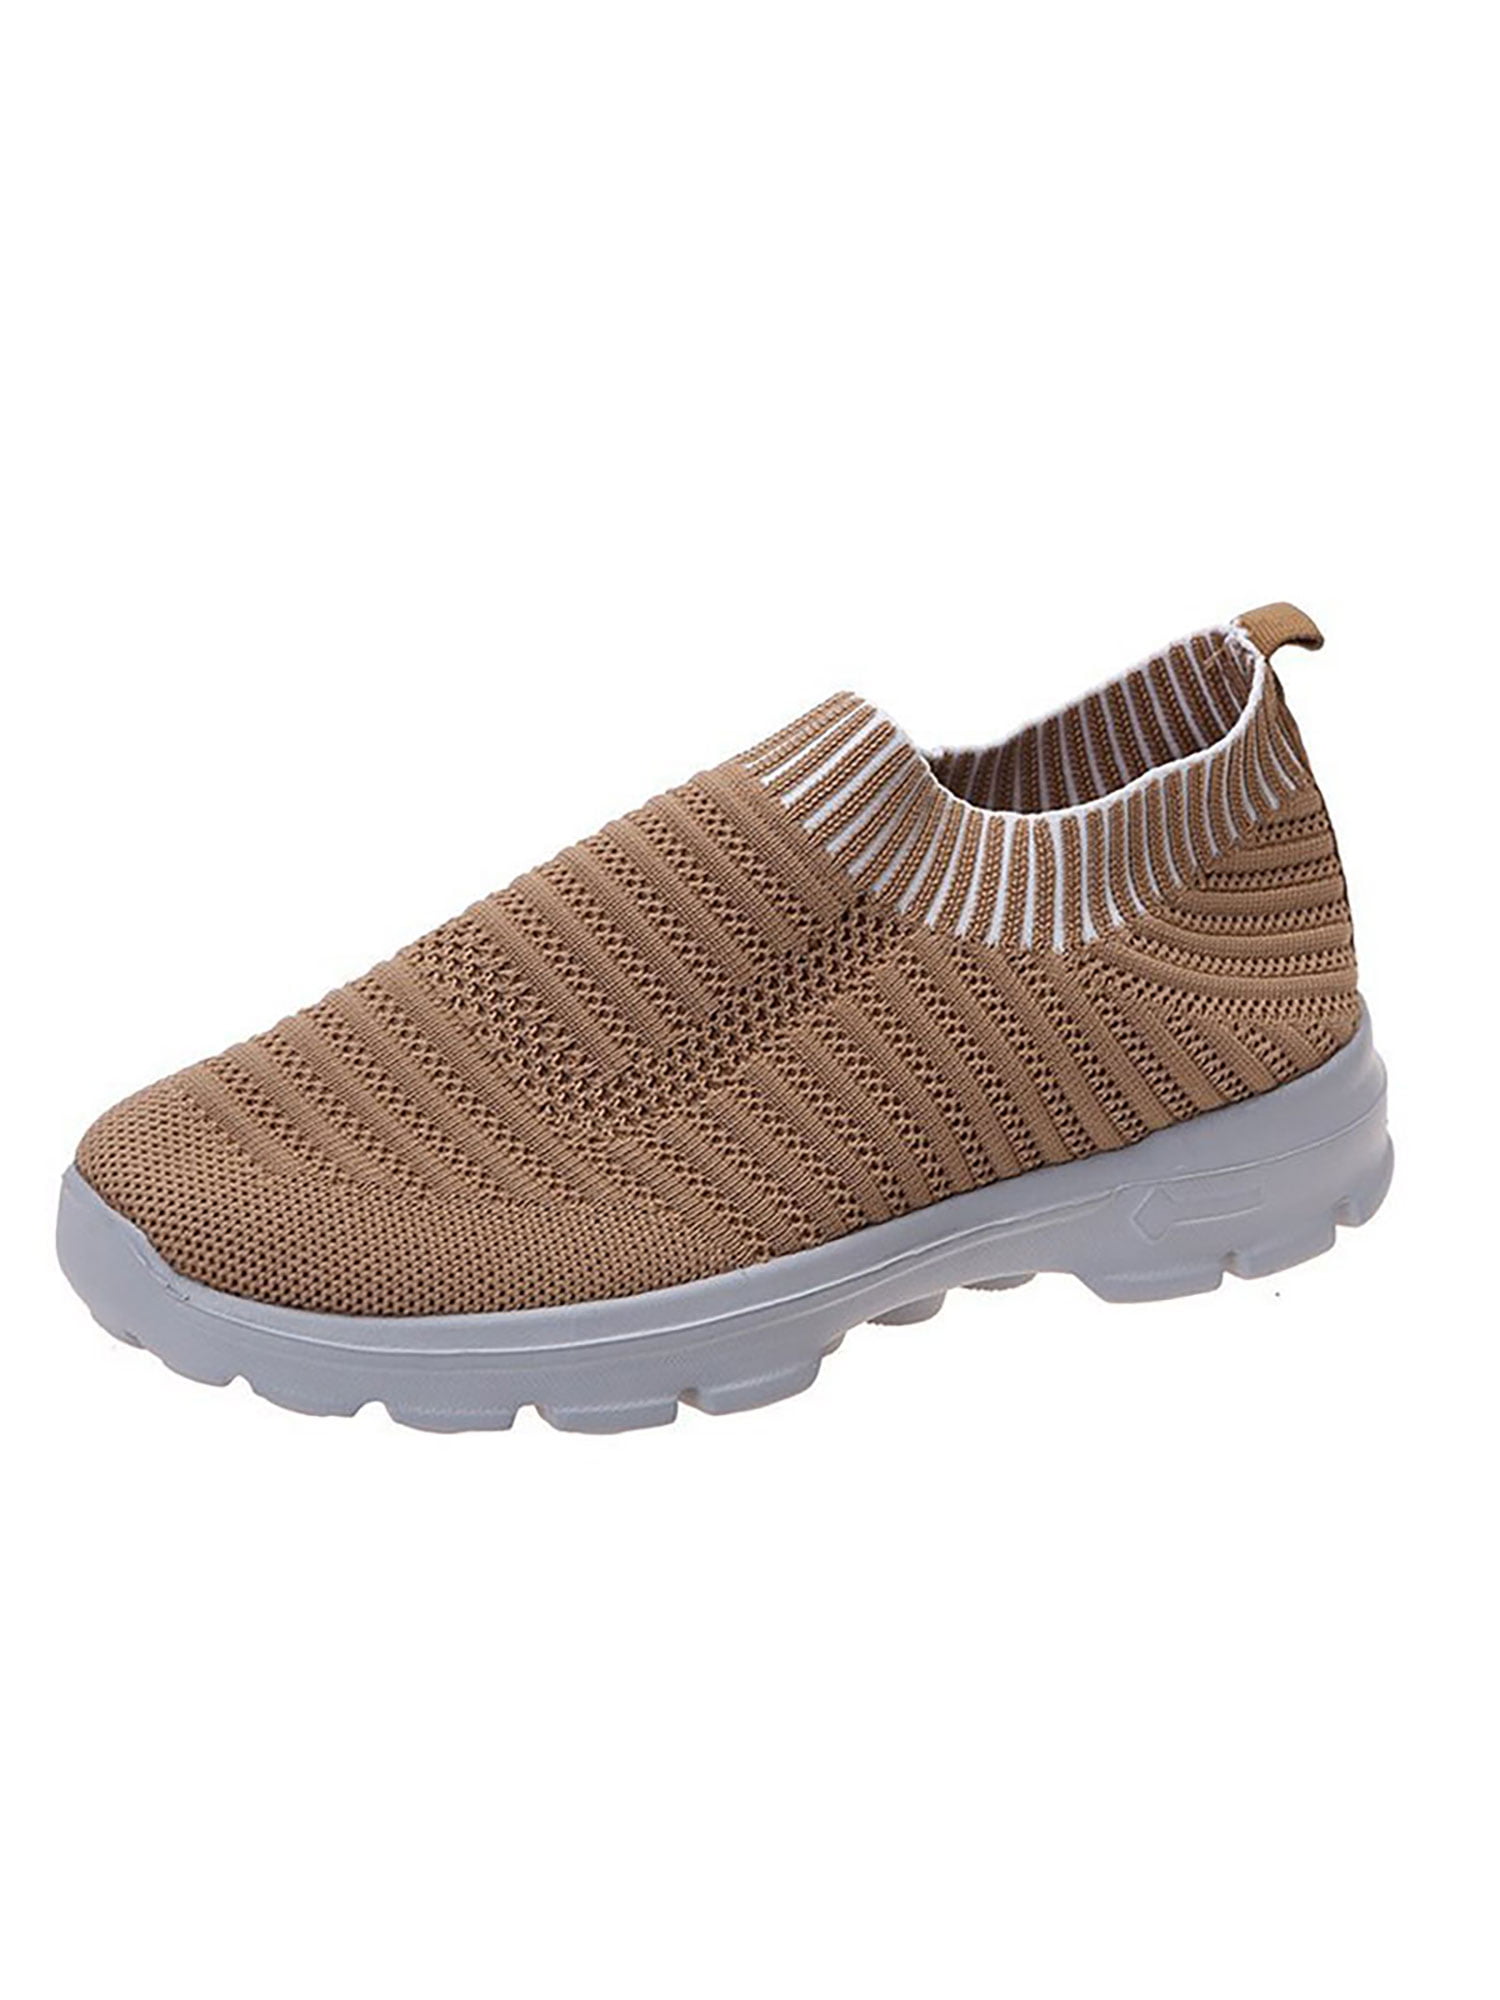 The Dirty wheat Ymiytan Women Sneakers Mesh Walking Sock Shoes Breathable Comfort Athletic  Shoes - Walmart.com